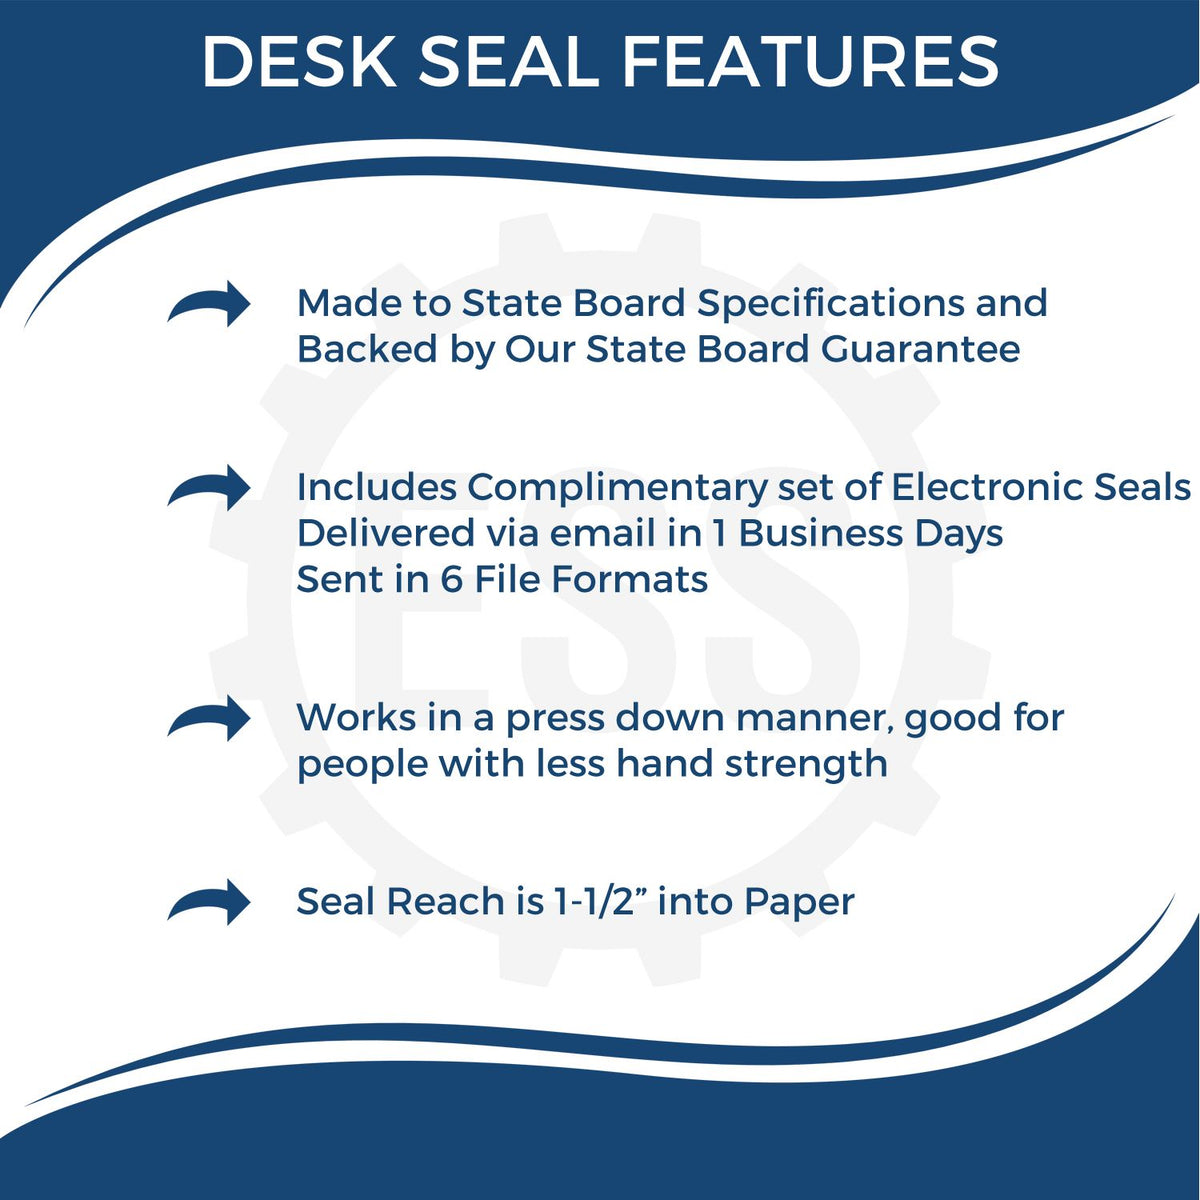 A picture of an infographic highlighting the selling points for the Texas Engineer Desk Seal